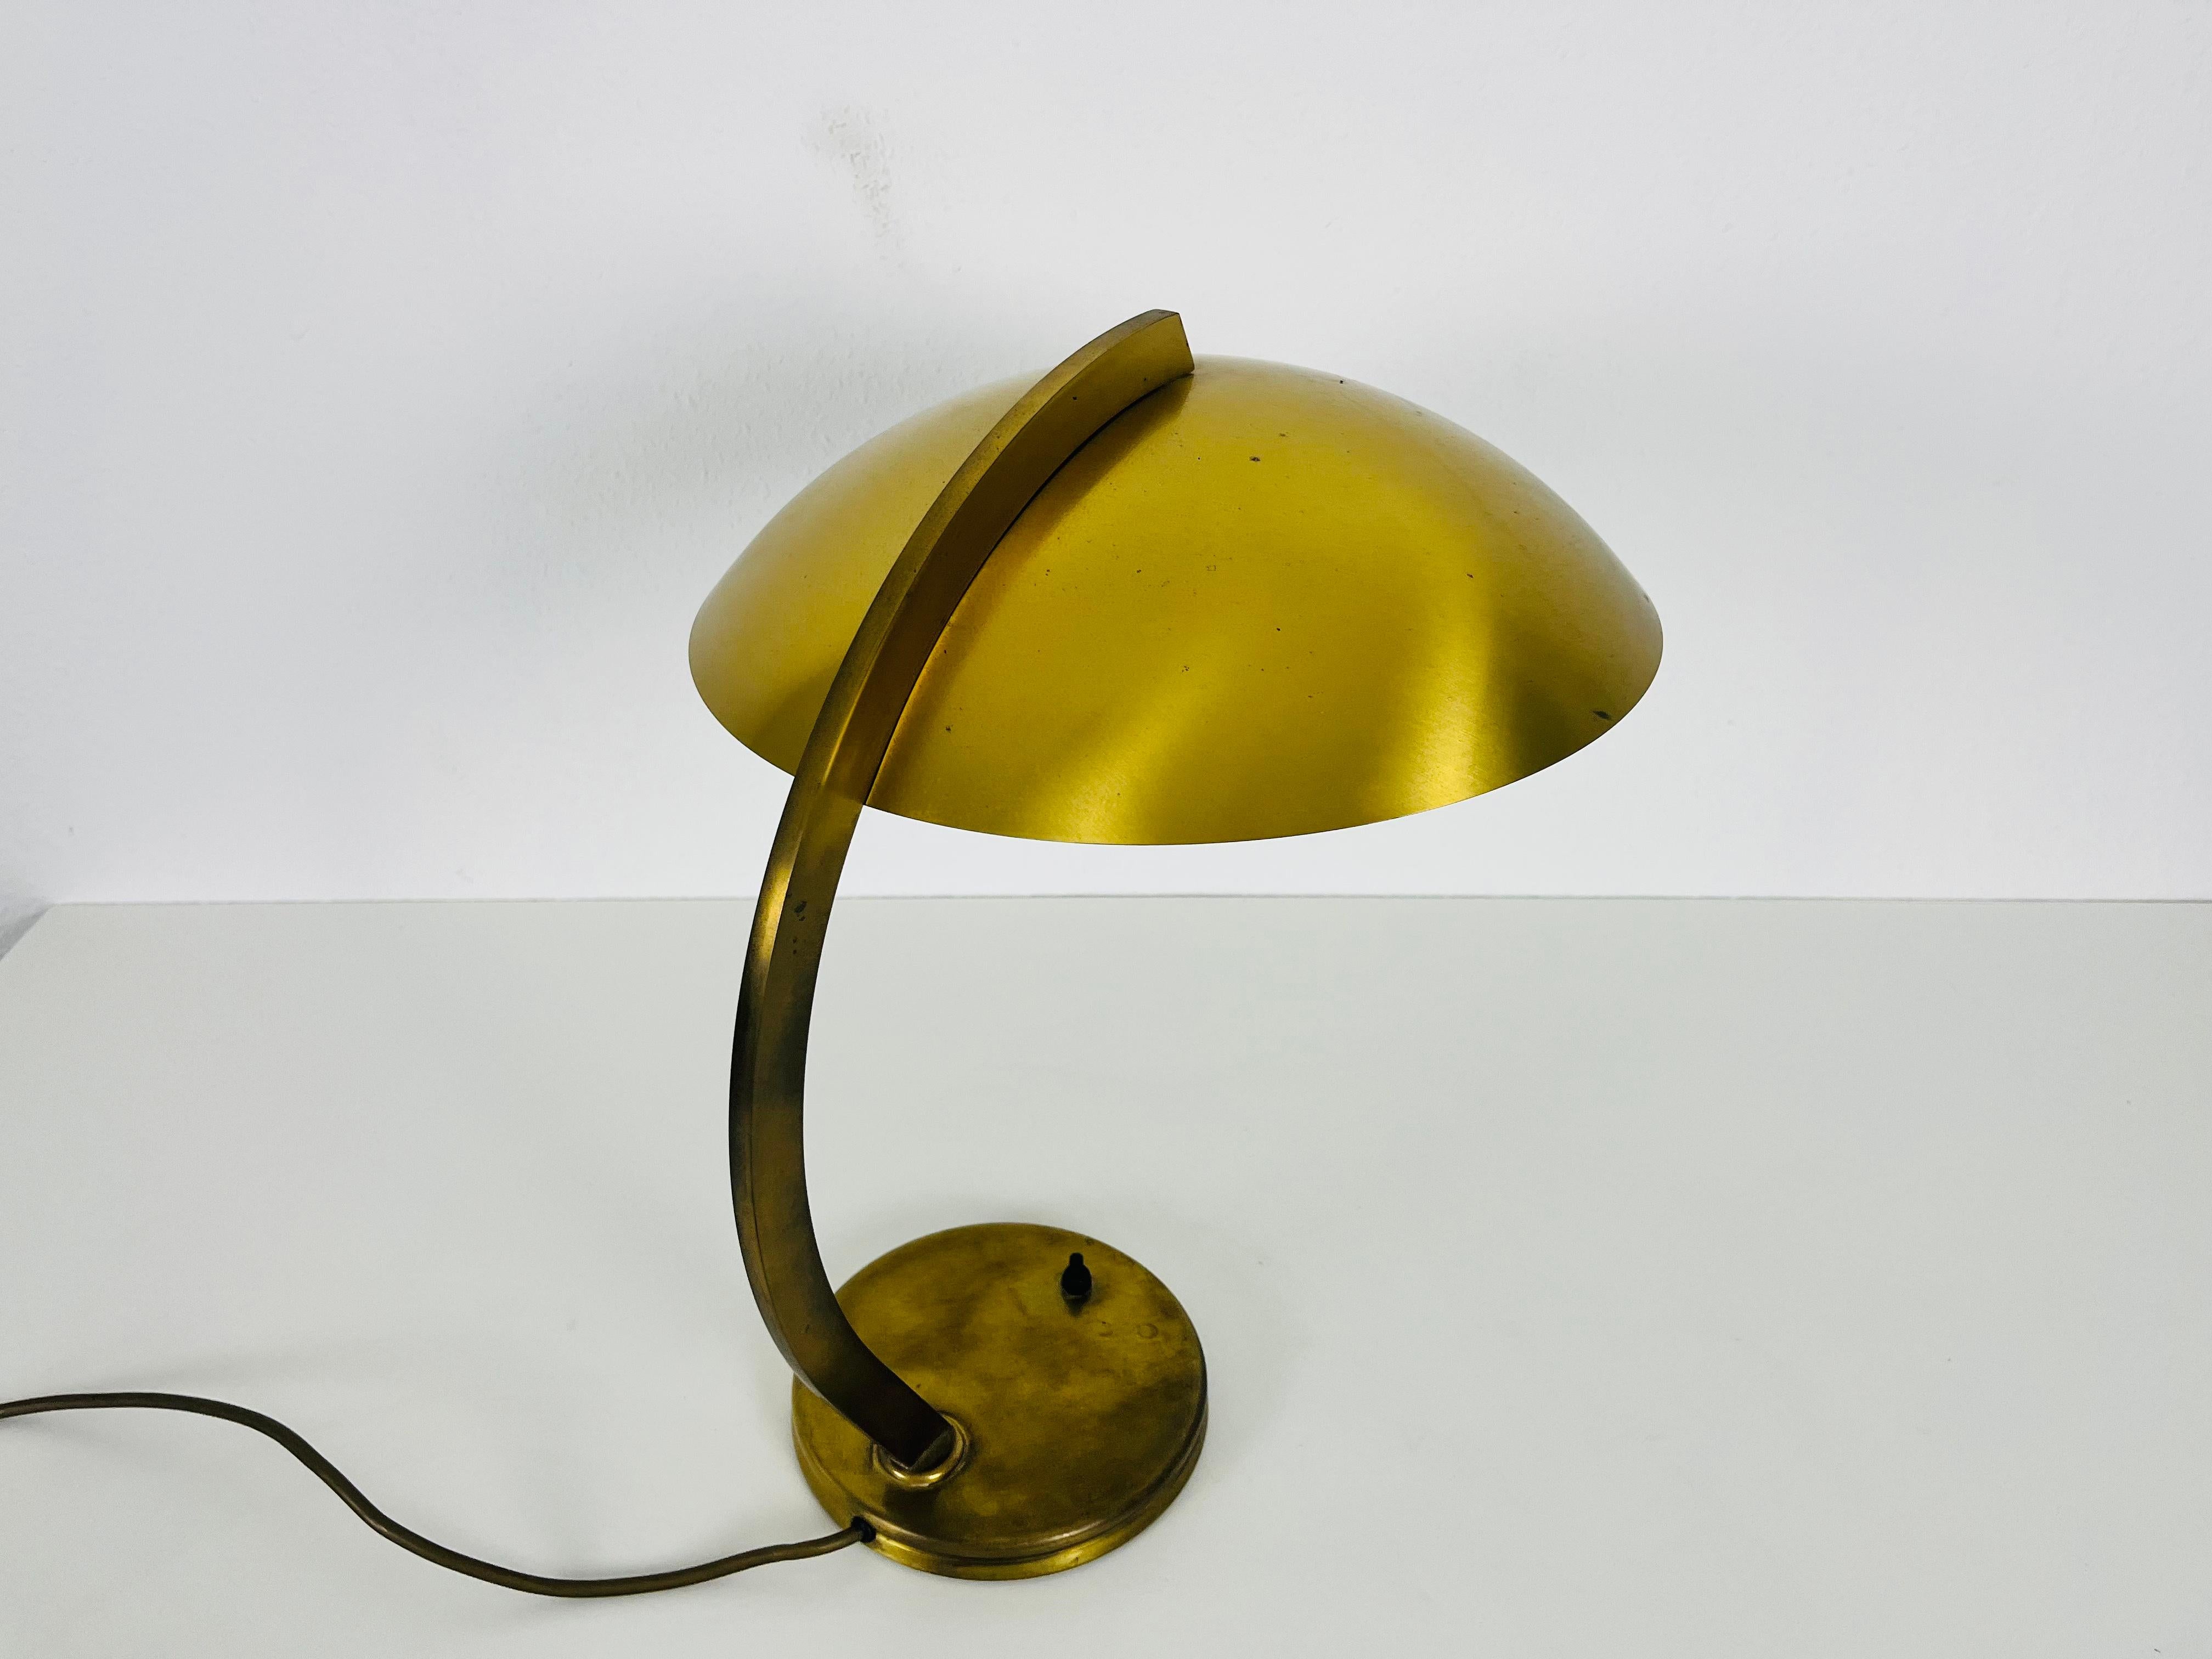 Hillebrand Midcentury Full Brass Table Lamp, 1960s, Germany For Sale 4